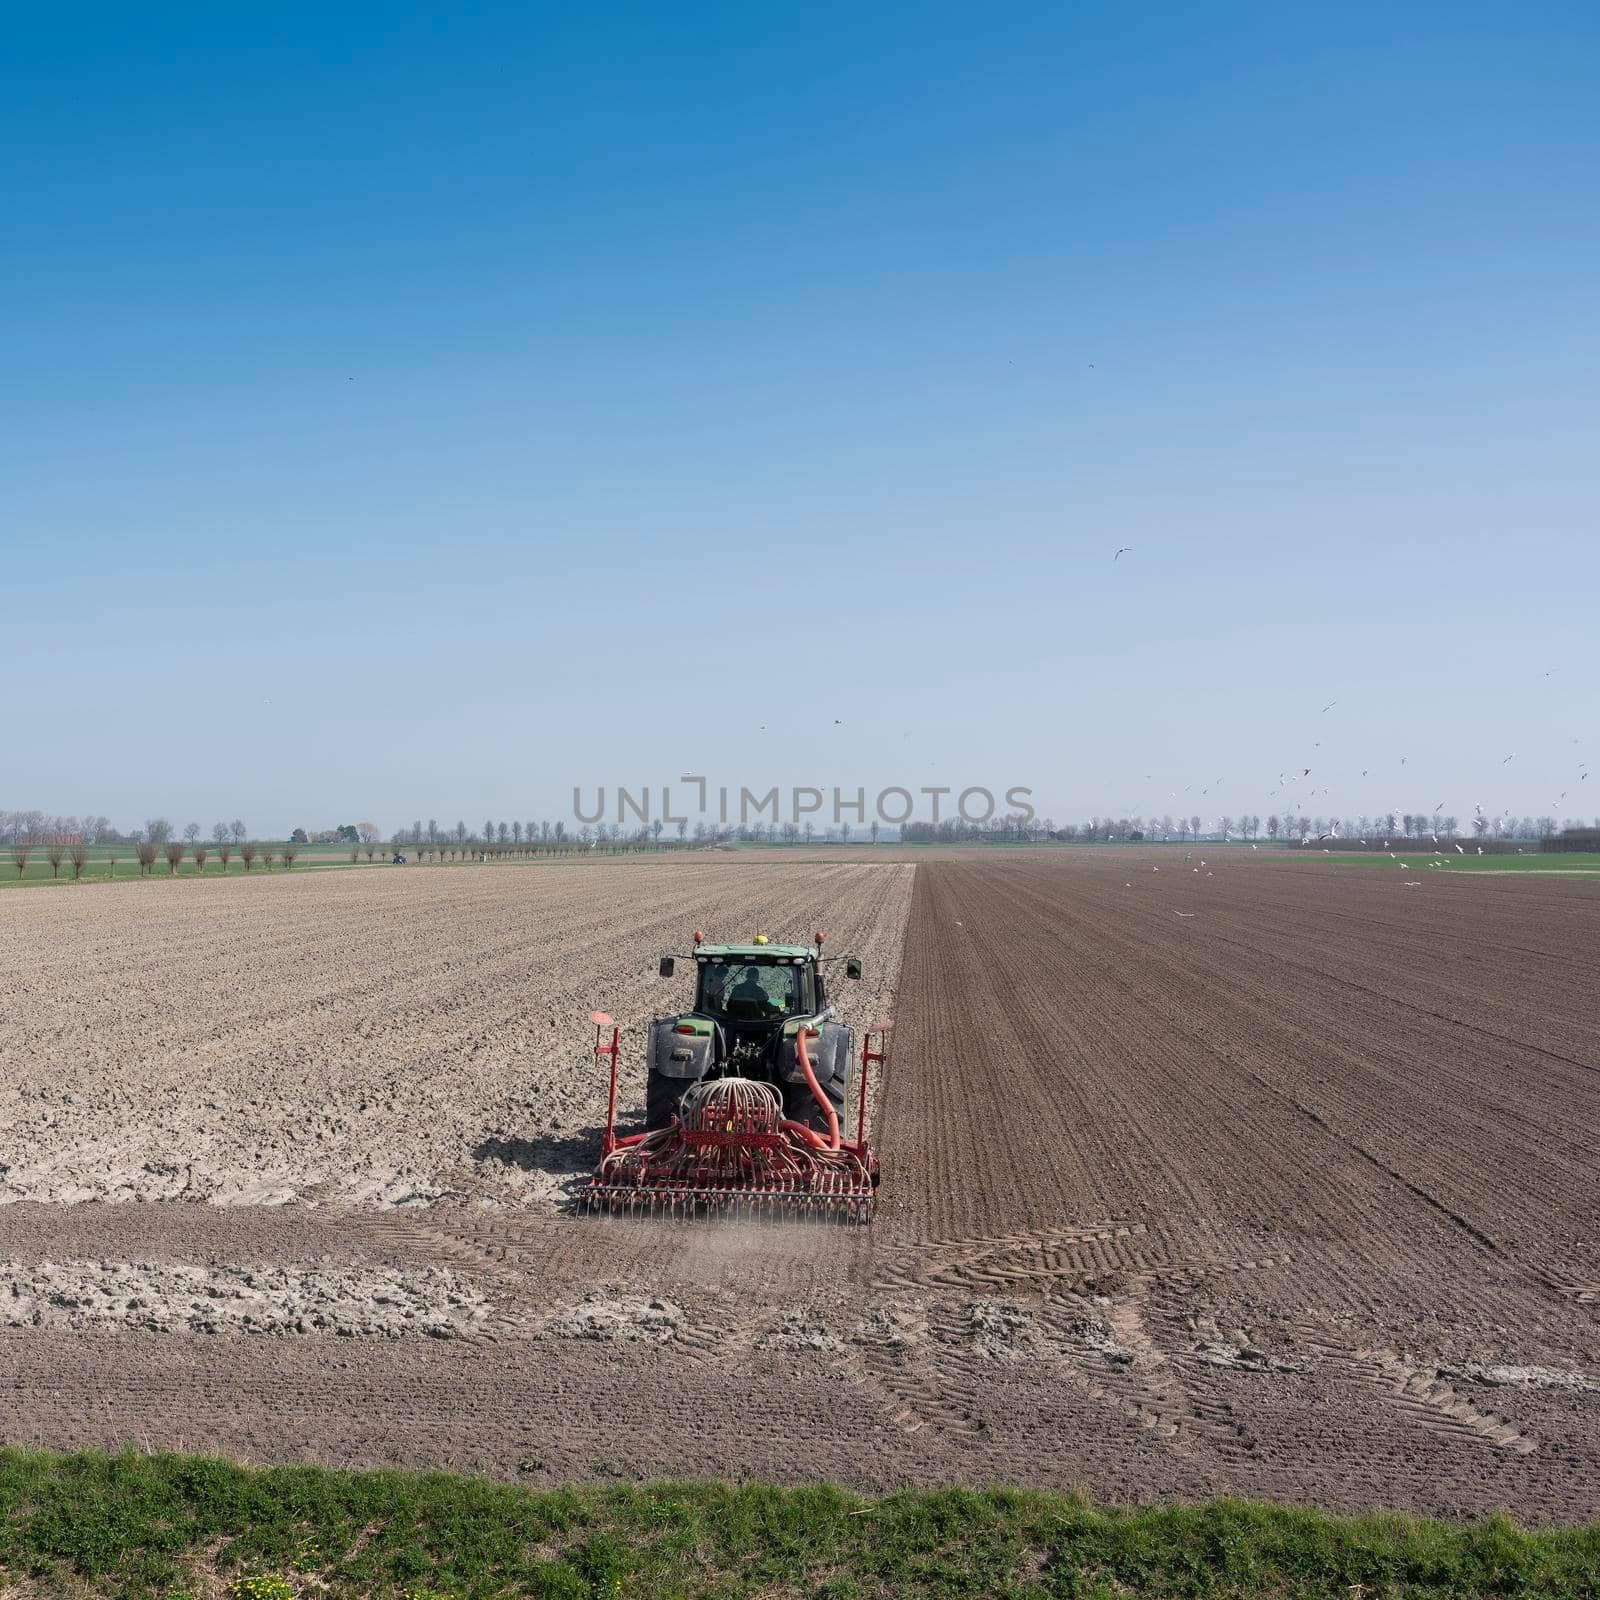 farmer works his land on rural countryside of noord beveland in dutch province zeeland on sunny spring day under blue sky in the netherlands